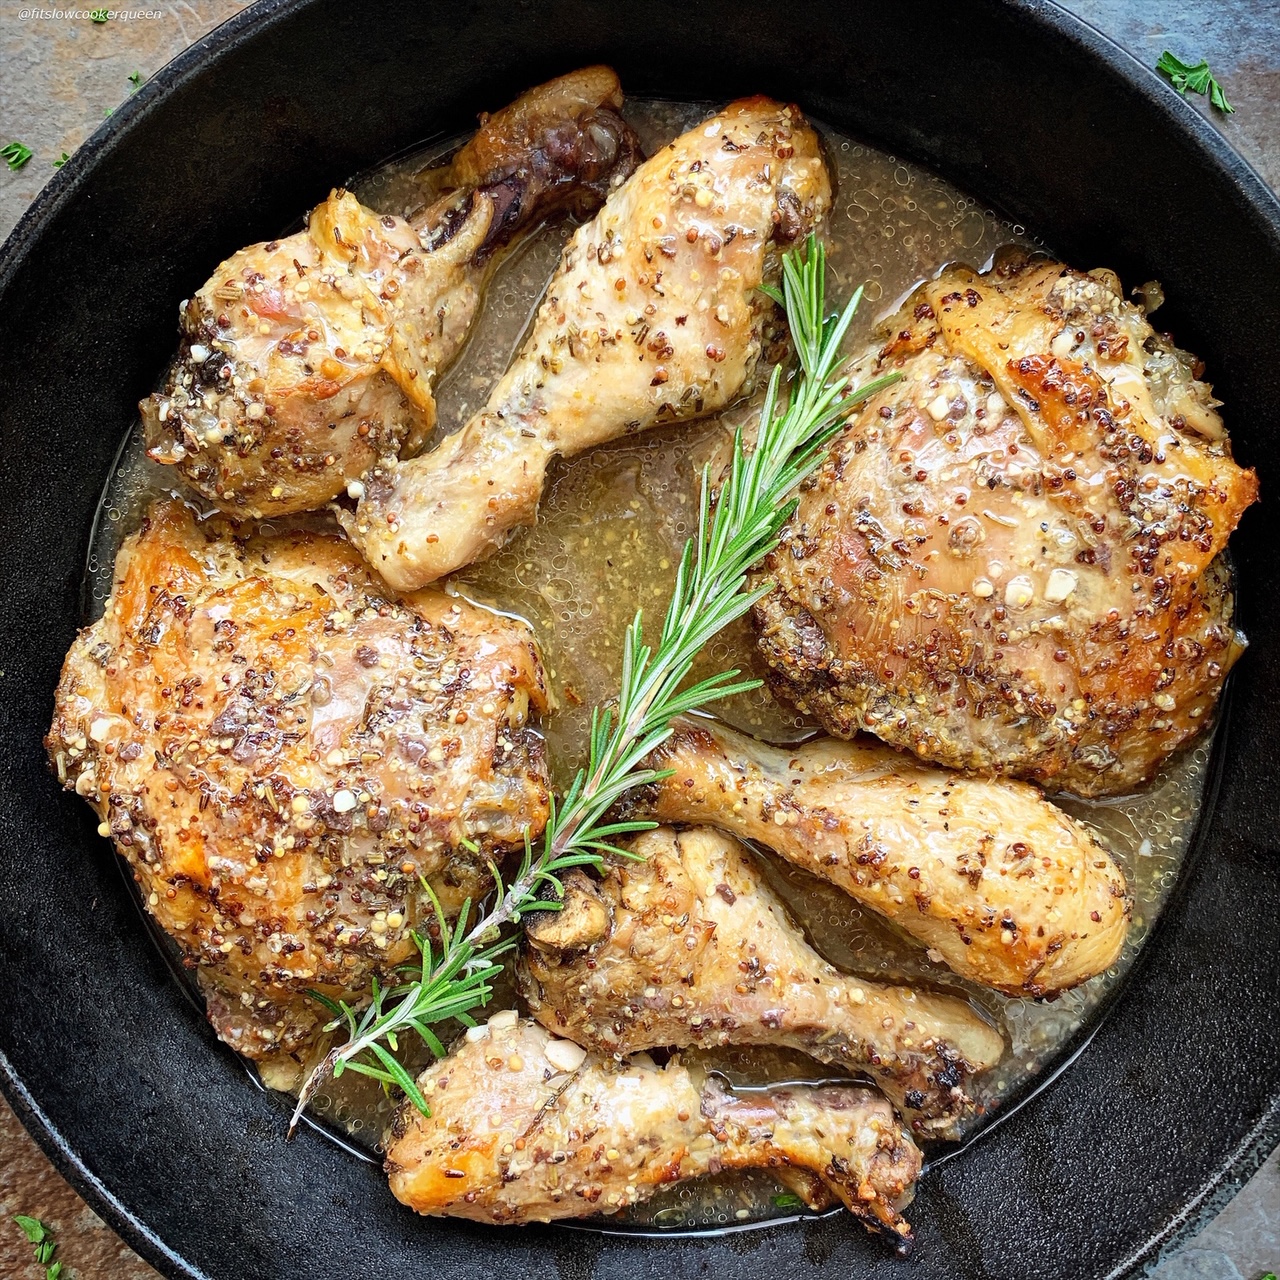 https://fitslowcookerqueen.com/wp-content/uploads/2018/08/Slow-Cooker-Instant-Pot-Rosemary-Dijon-Chicken-Low-Carb-PaleoWhole30-6.jpg